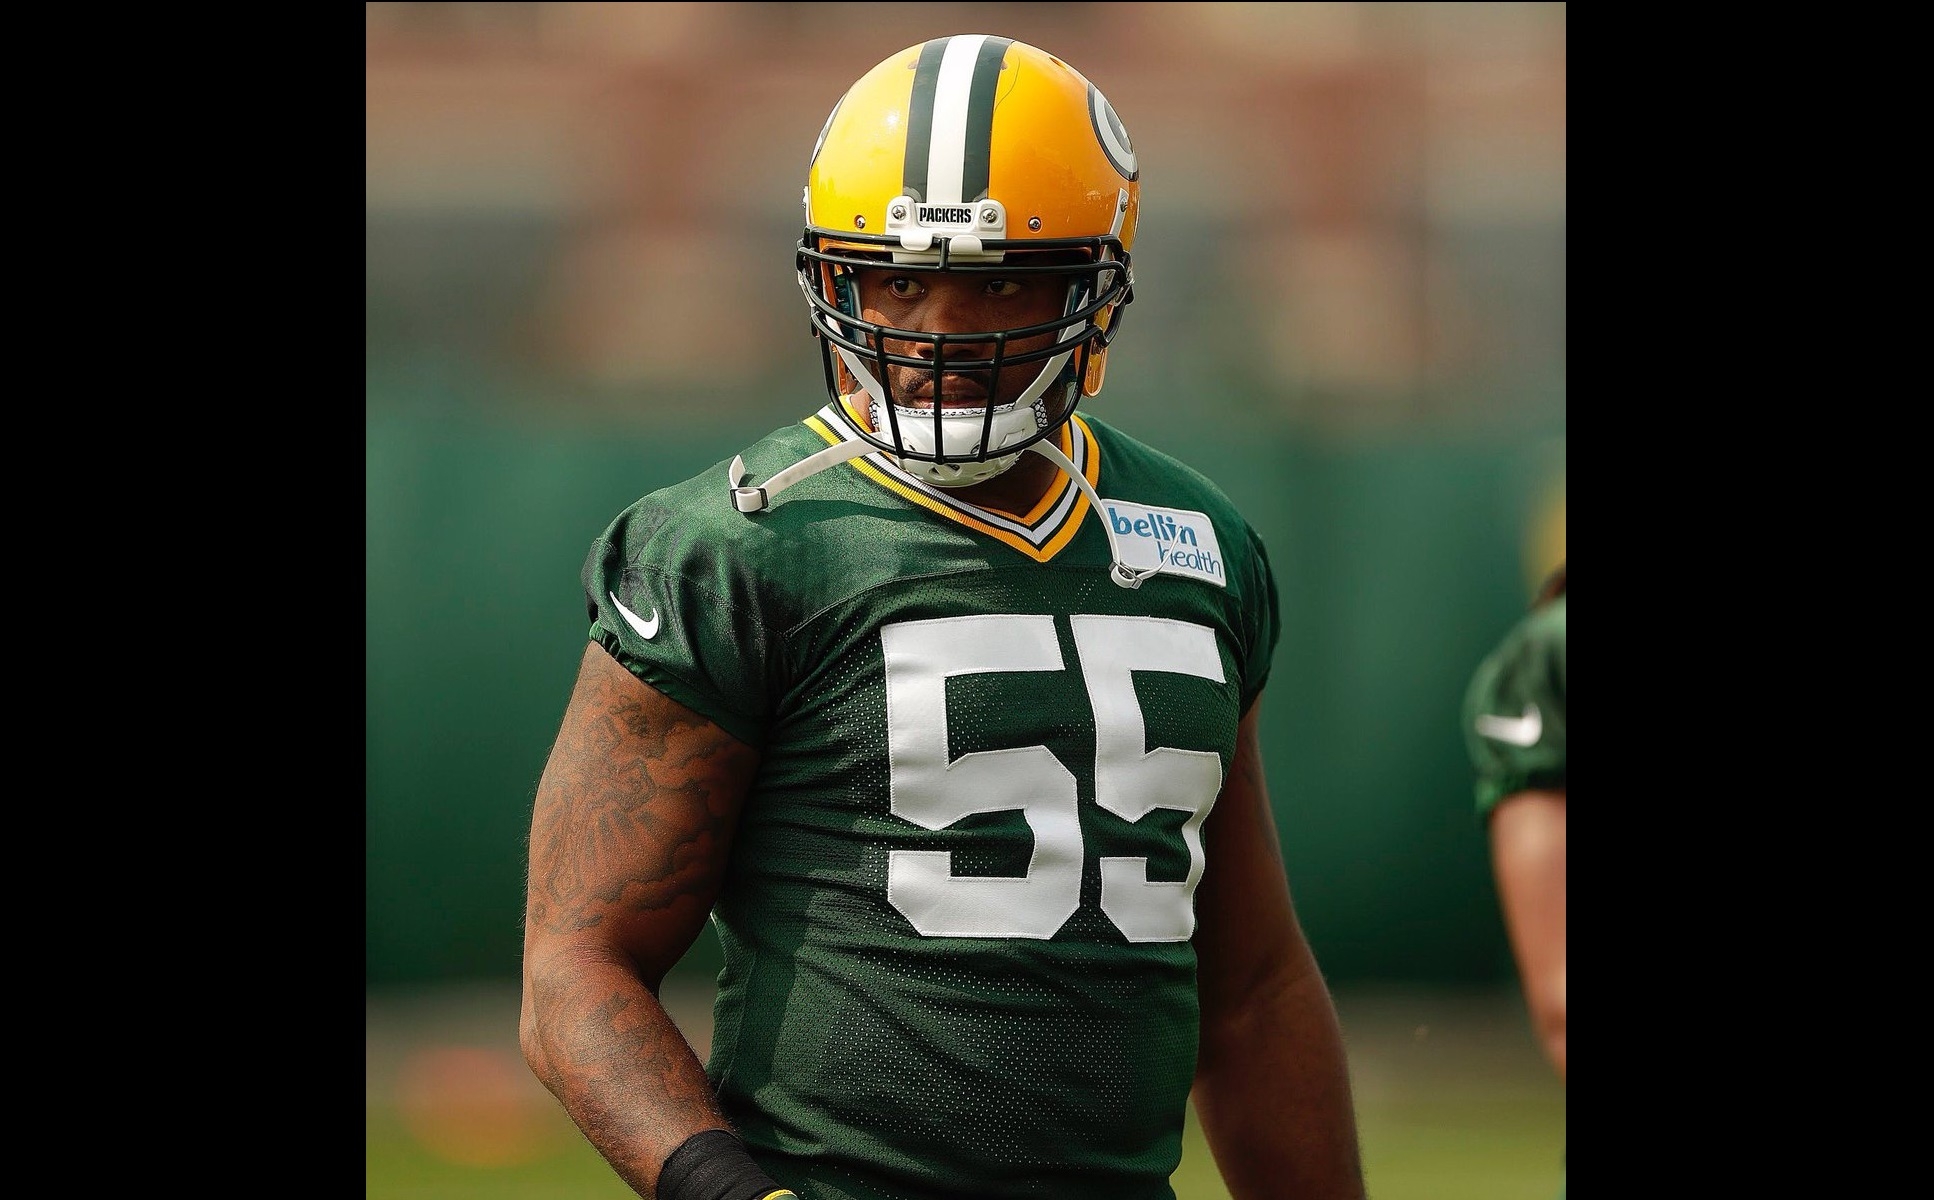 LB Ahmad Brooks gets started on the edge with Packers